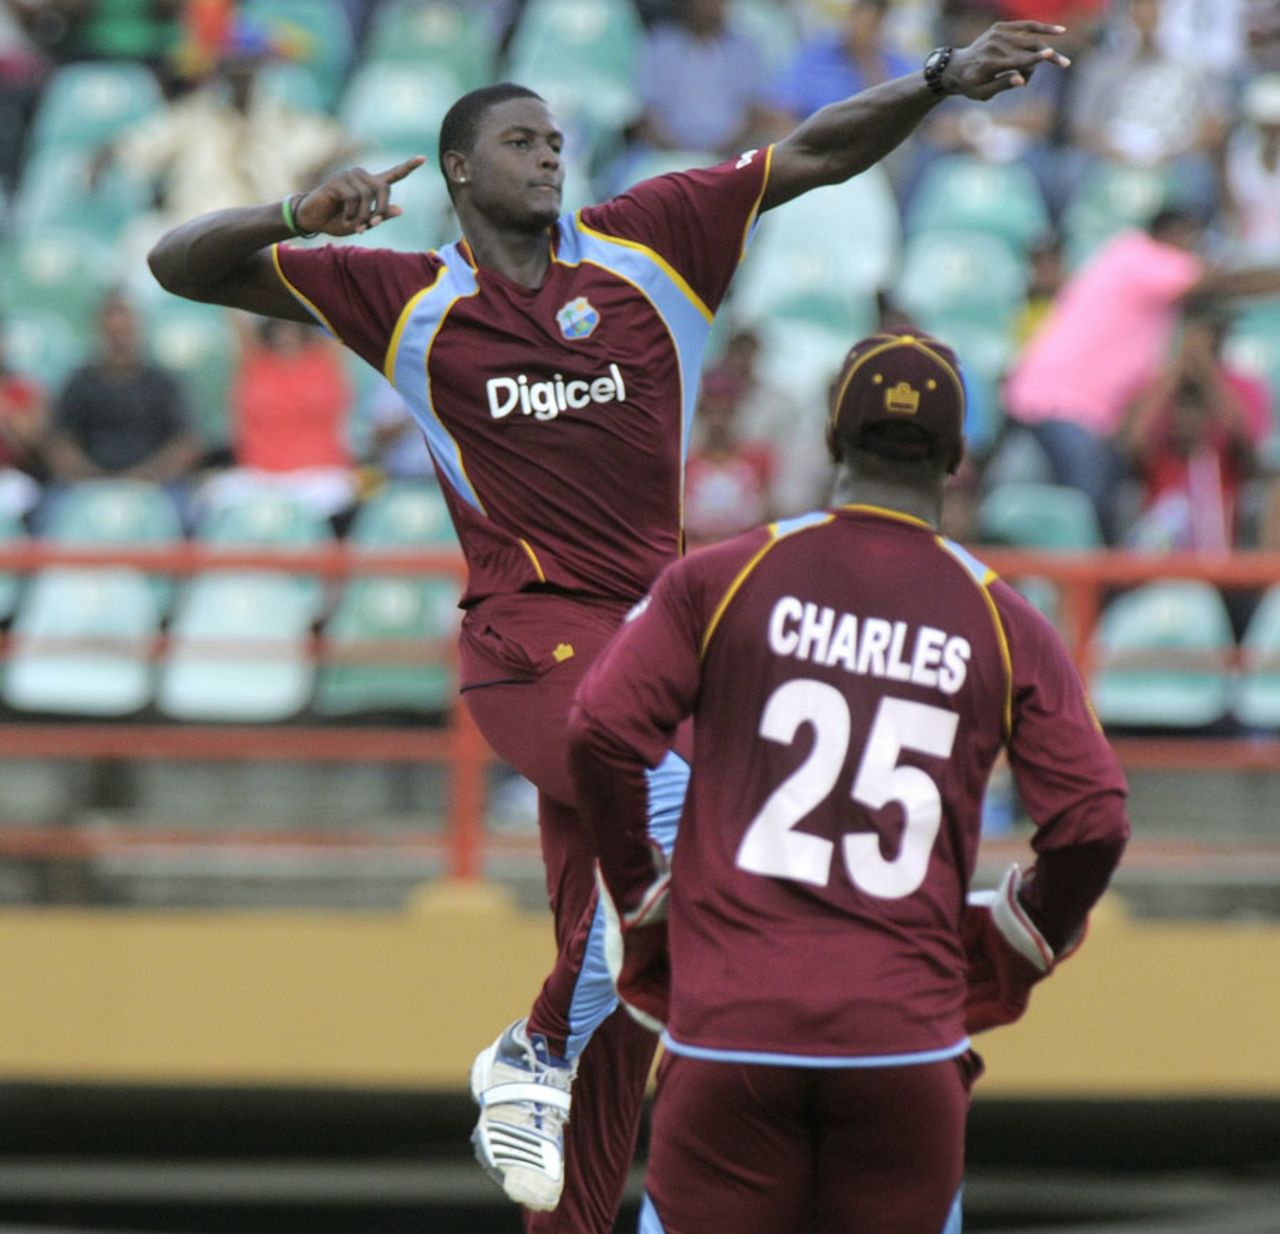 Jason Holder takes off after claiming another wicket, West Indies v Pakistan, 1st ODI, Providence, July 14, 2013